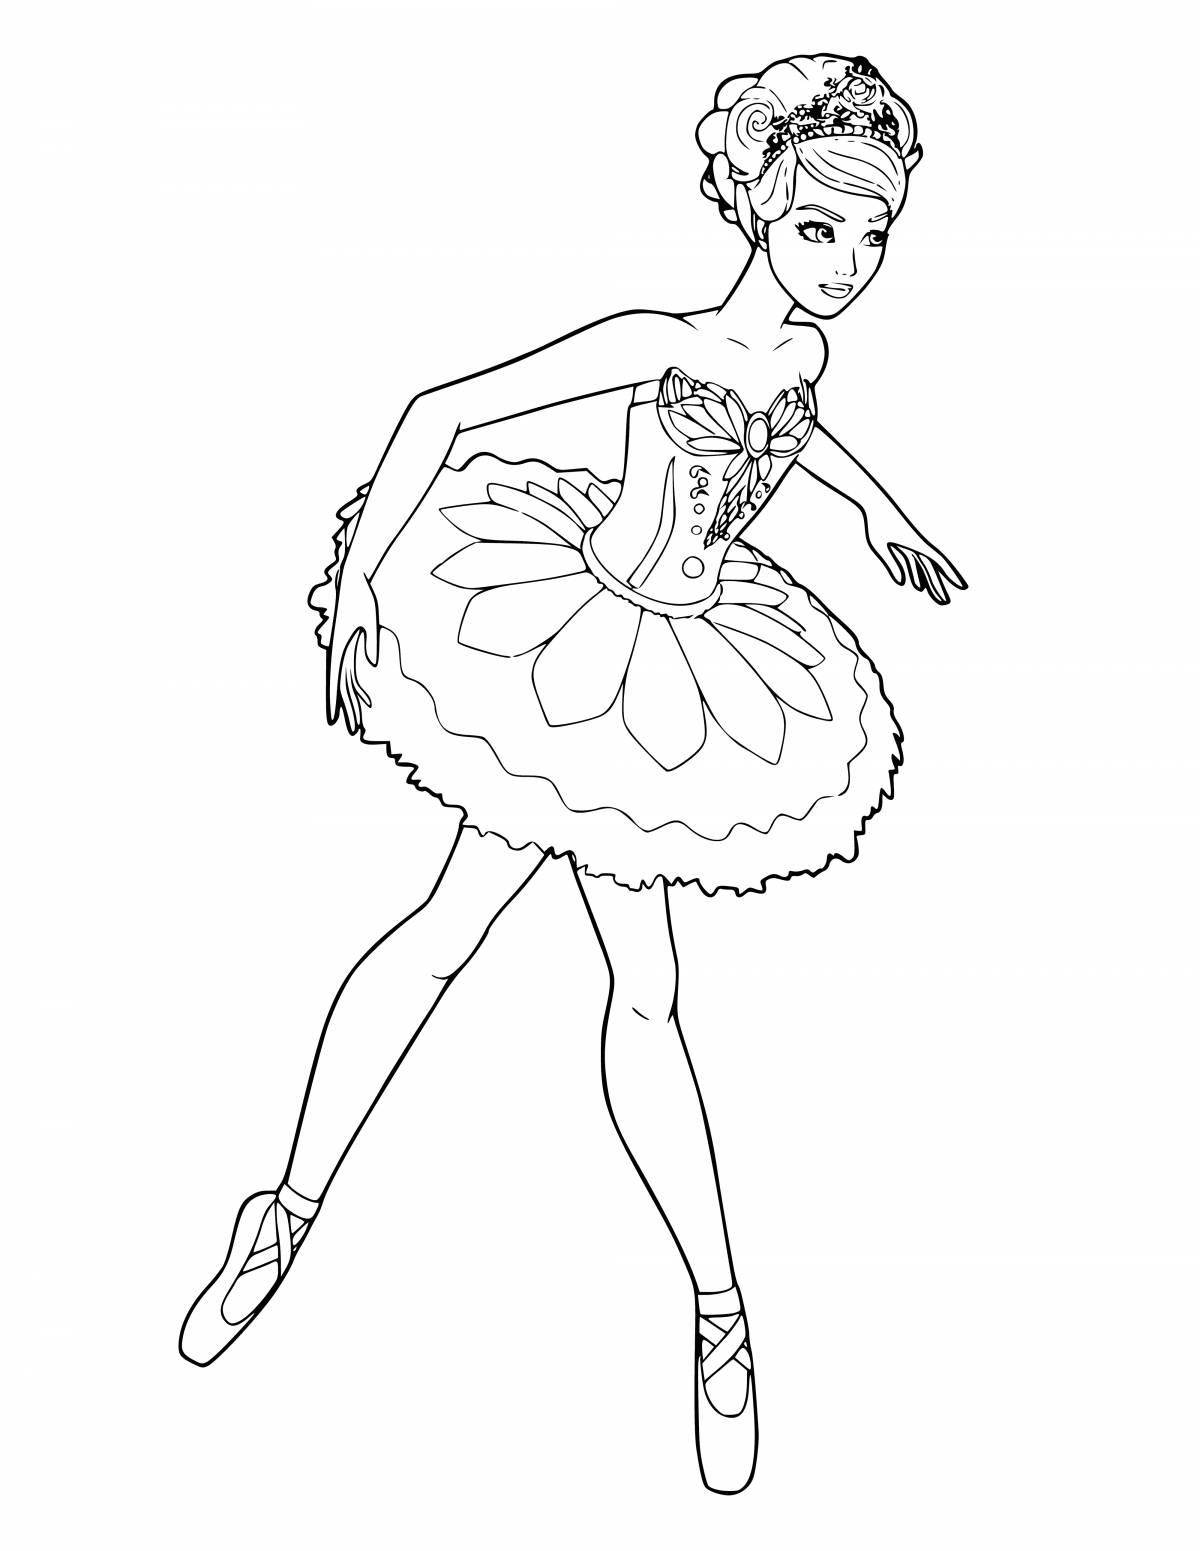 Delightful giselle coloring book